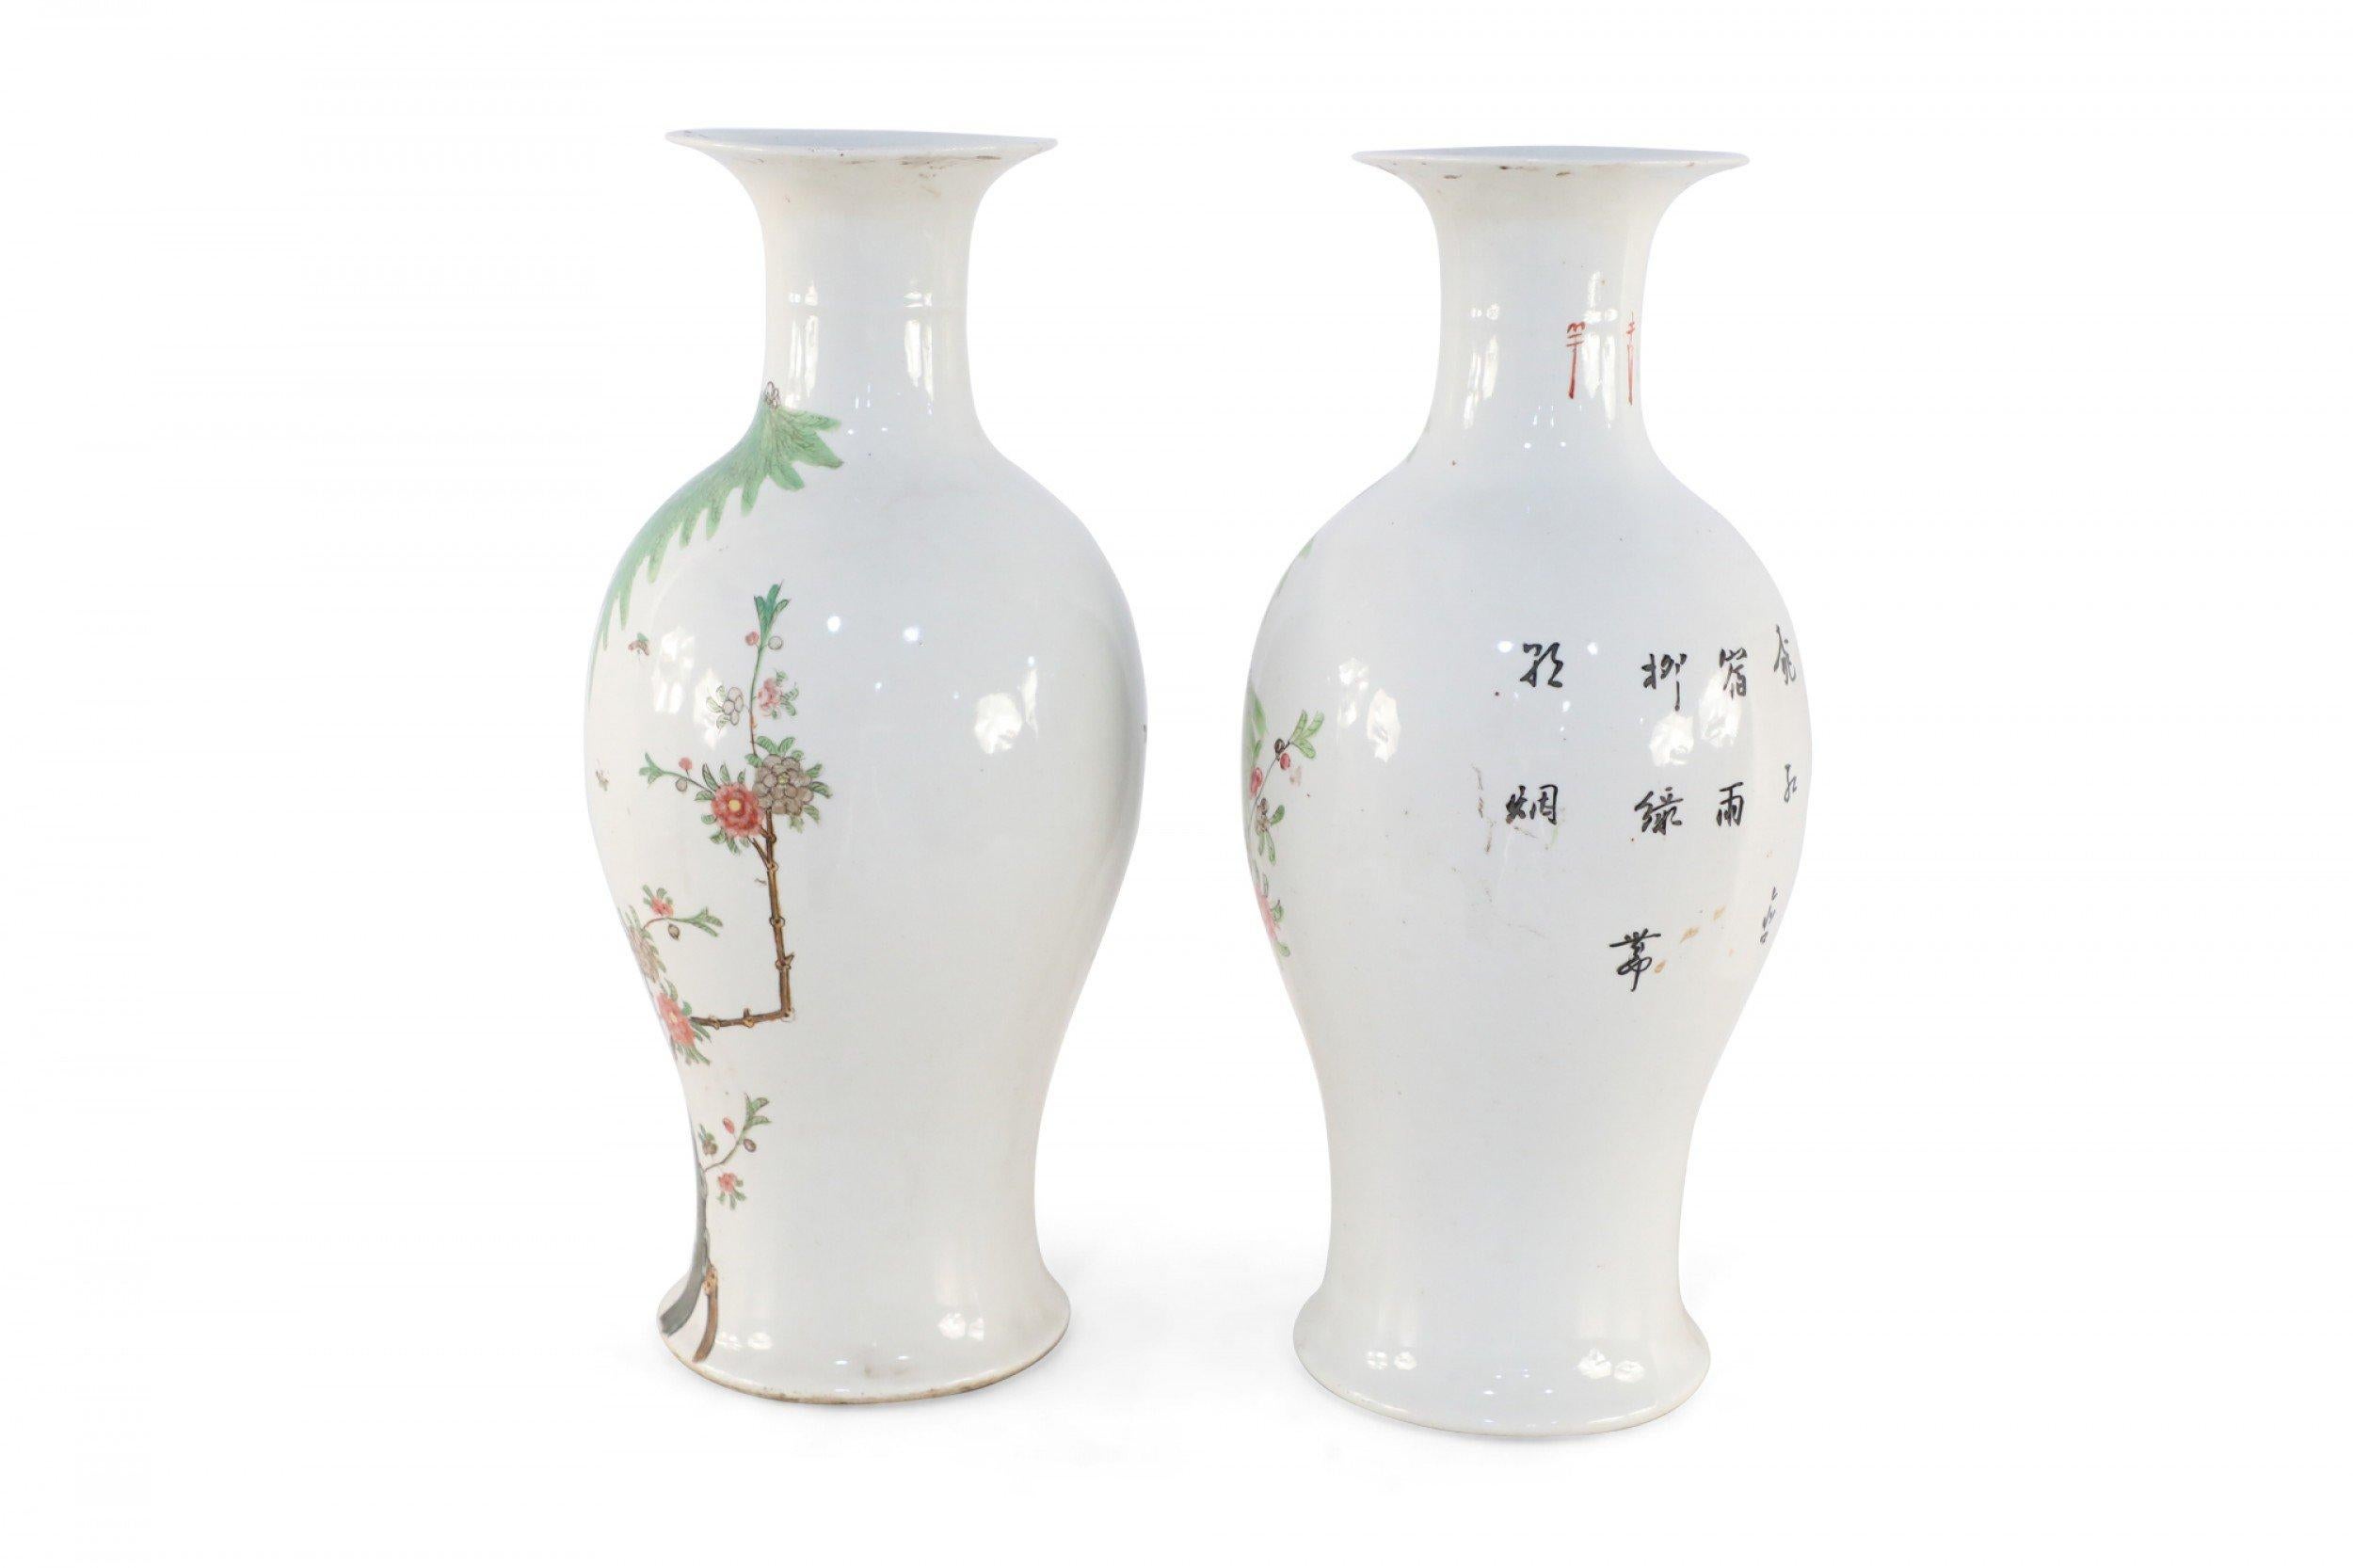 Pair of Chinese White and Cherry Blossom Branch Porcelain Urns For Sale 1